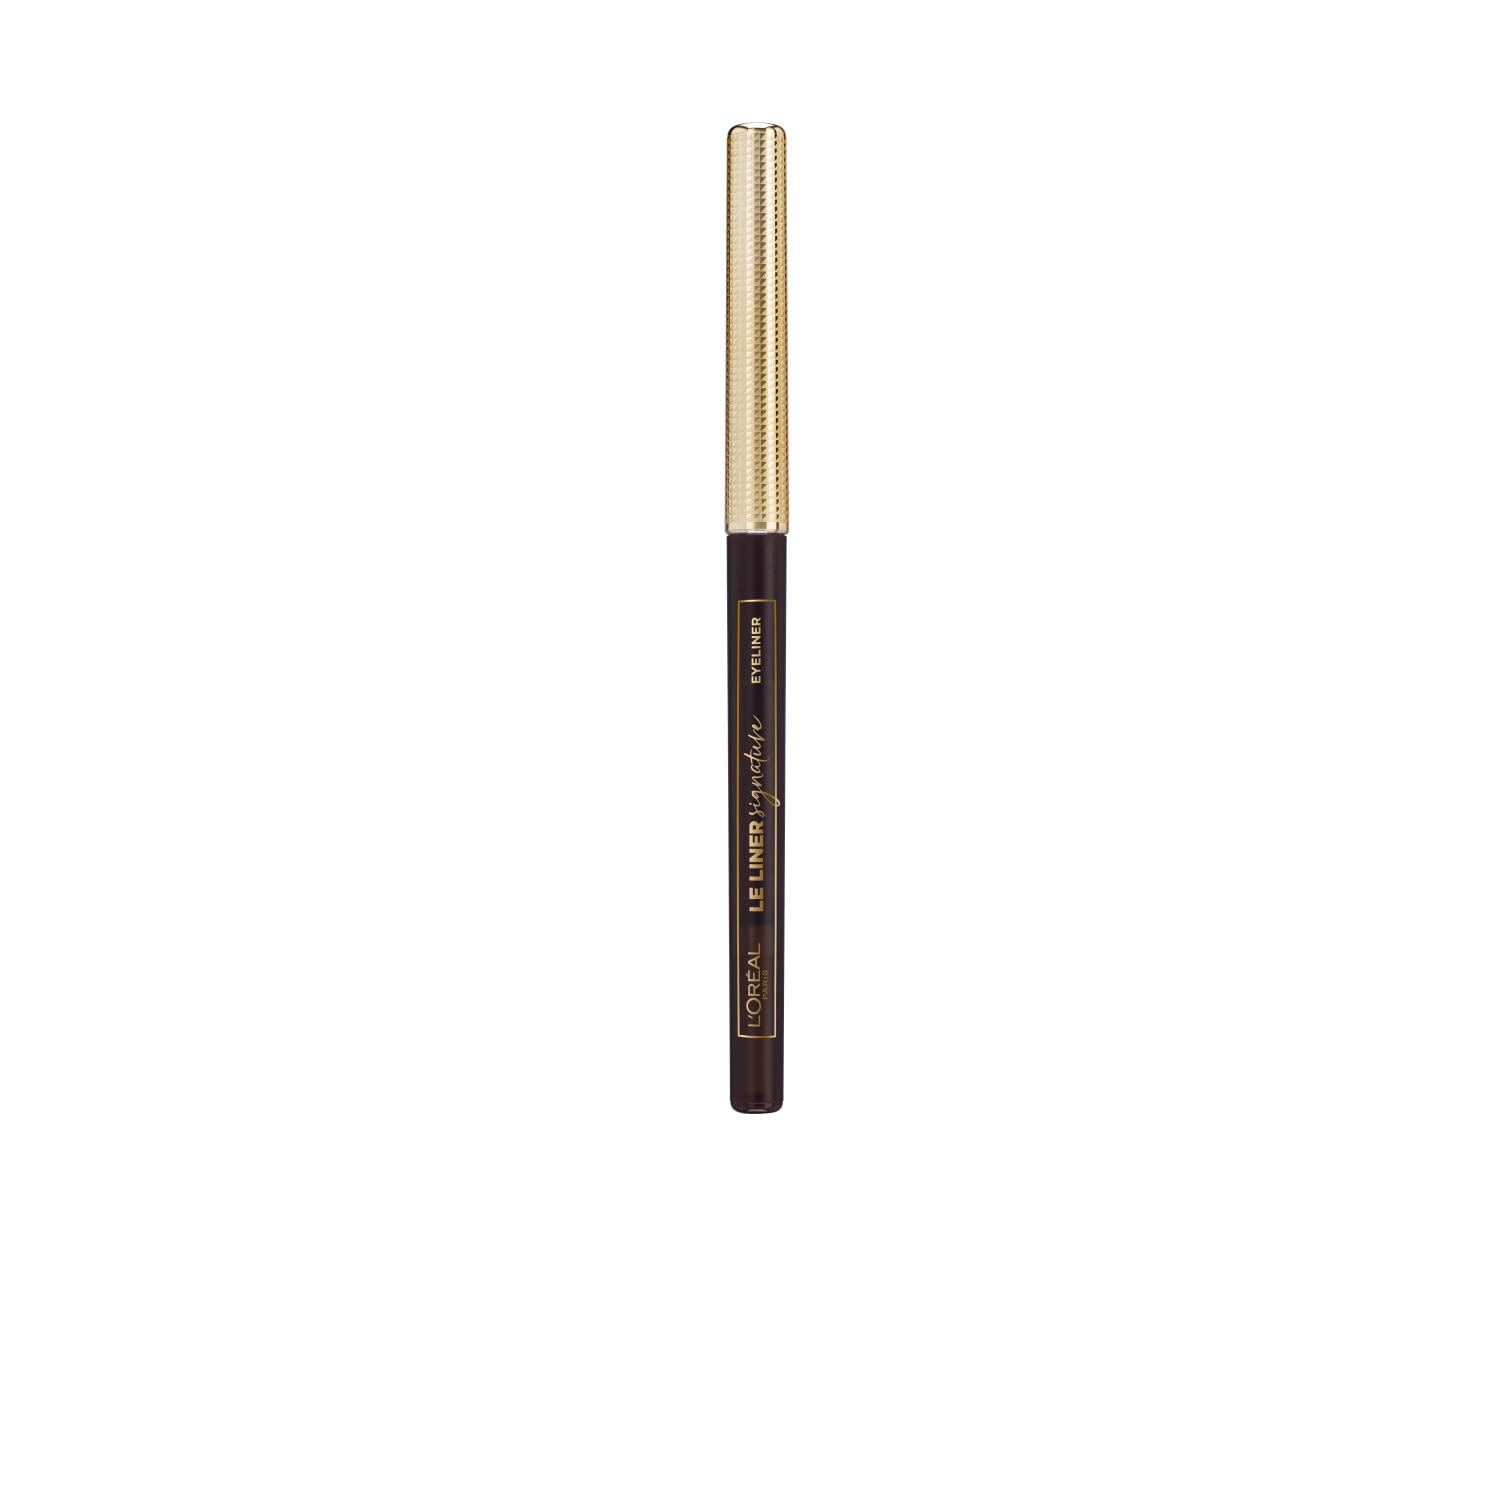 L\'Oréal Paris Le Liner Signature 05 Brown Silk, Precise & Long-Lasting Eyeliner, Pen Shape with Retractable Lead, Smudge-proof and Waterproof, Pack of 1